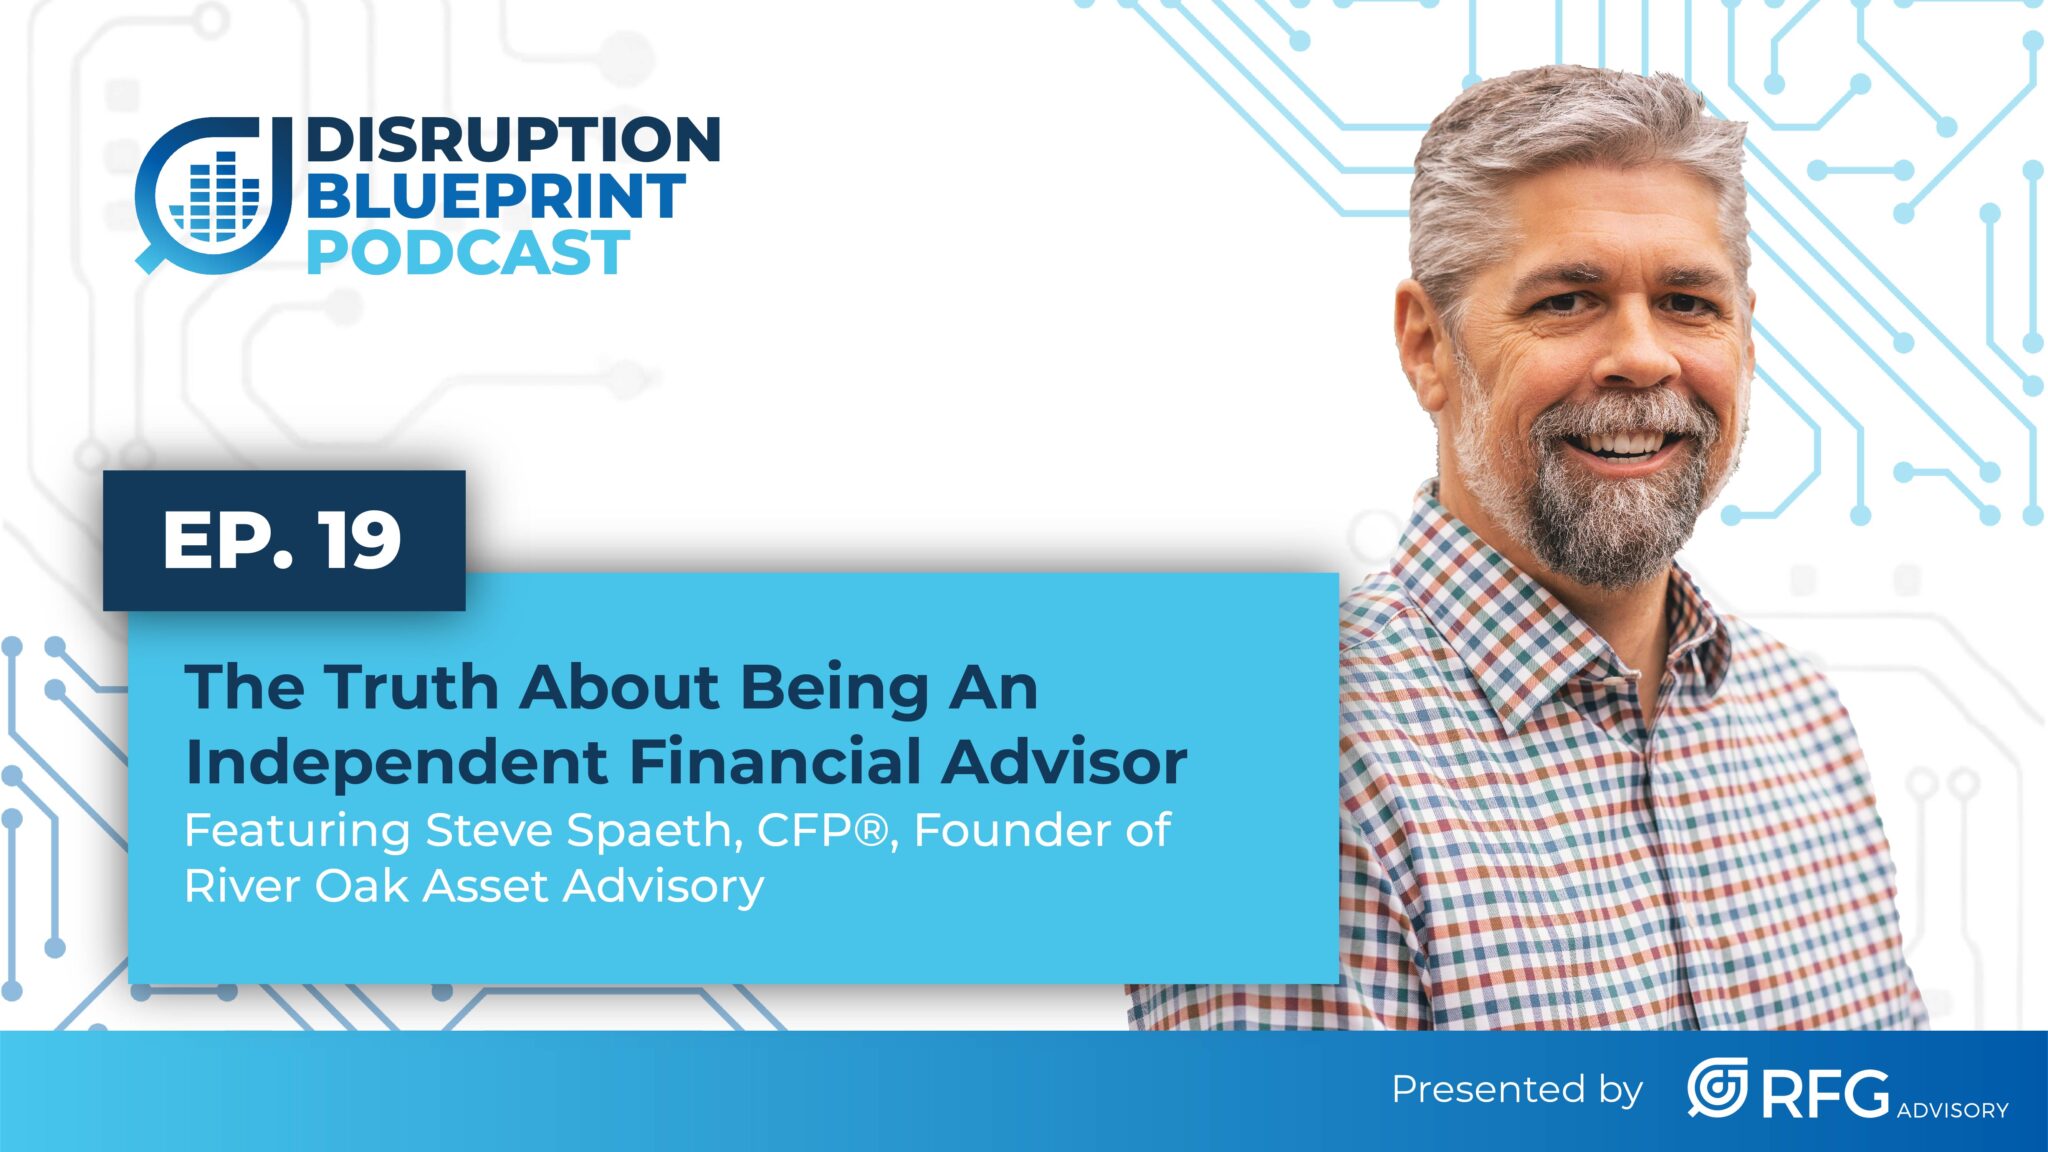 EP 19: The Truth About Being An Independent Financial Advisor ft. Steve Spaeth, CFP®